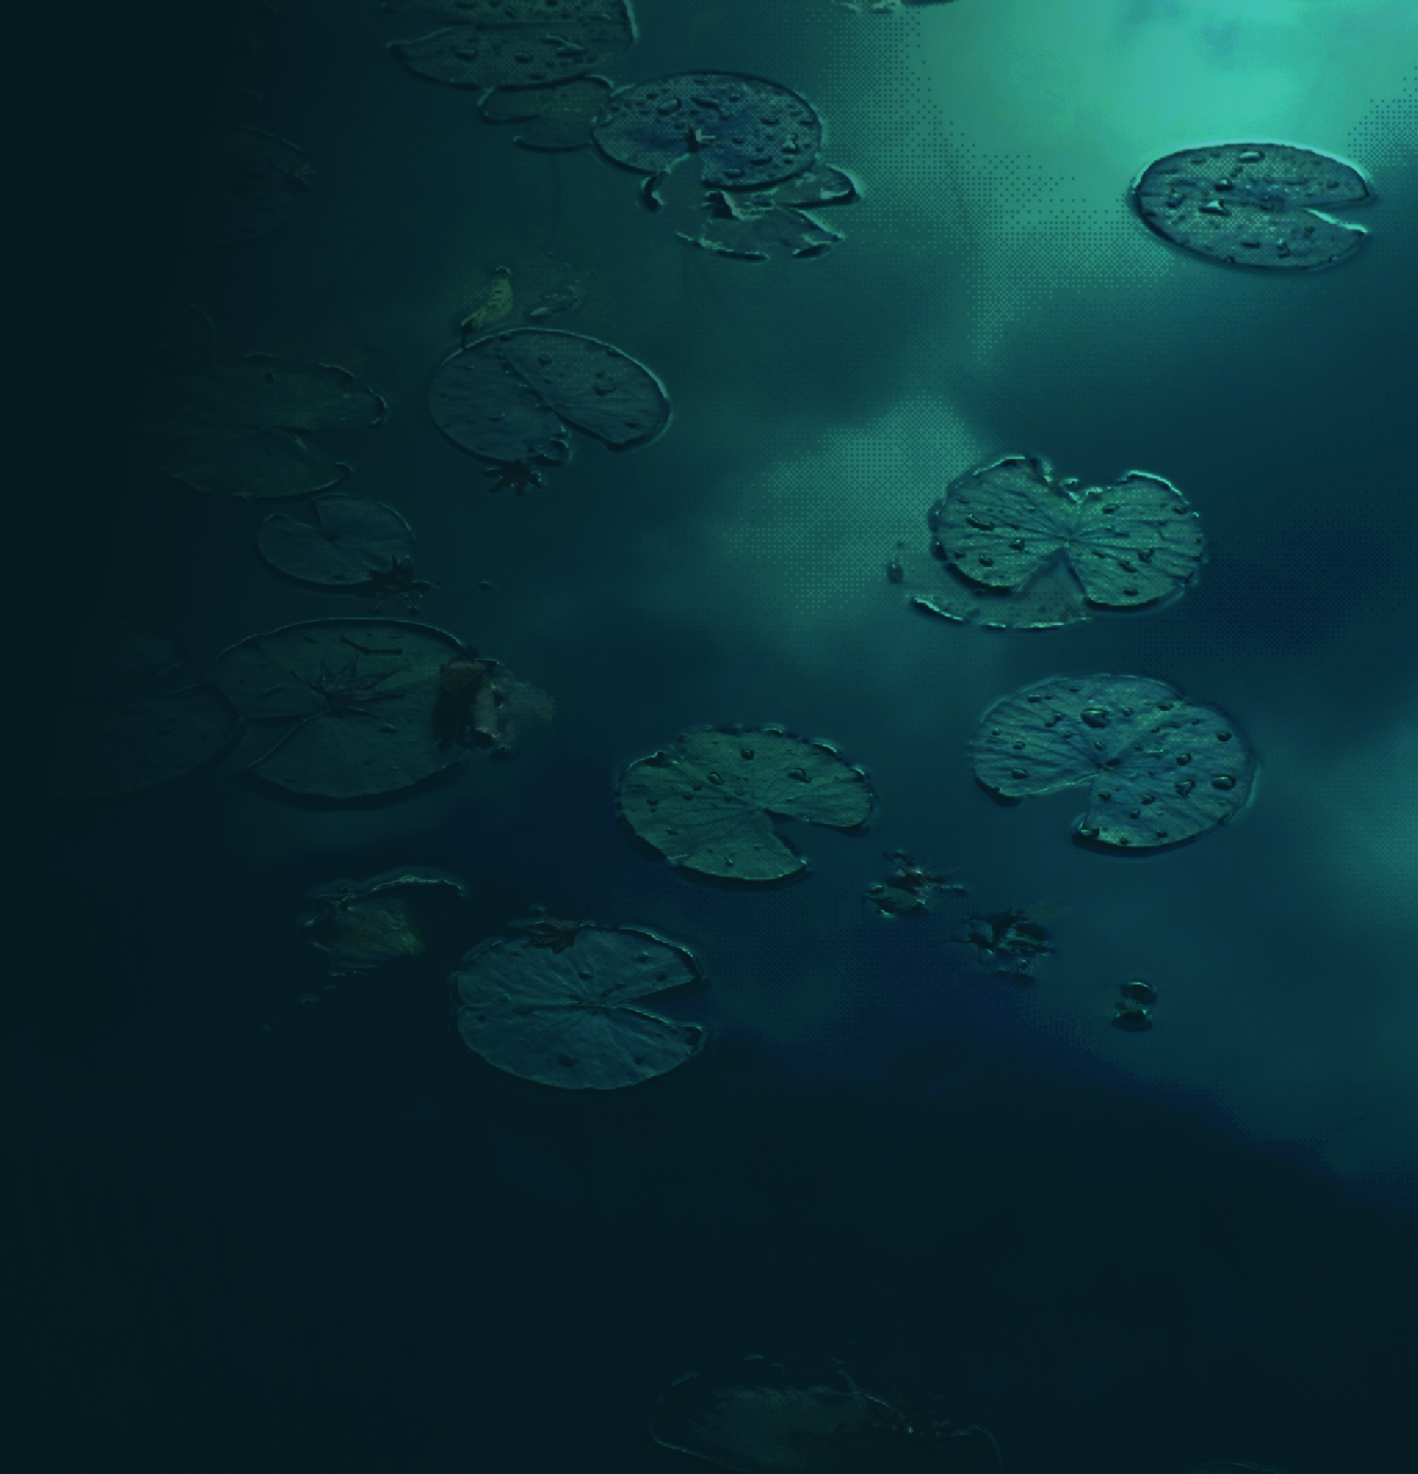 Just a background image of a swamp with lilypads